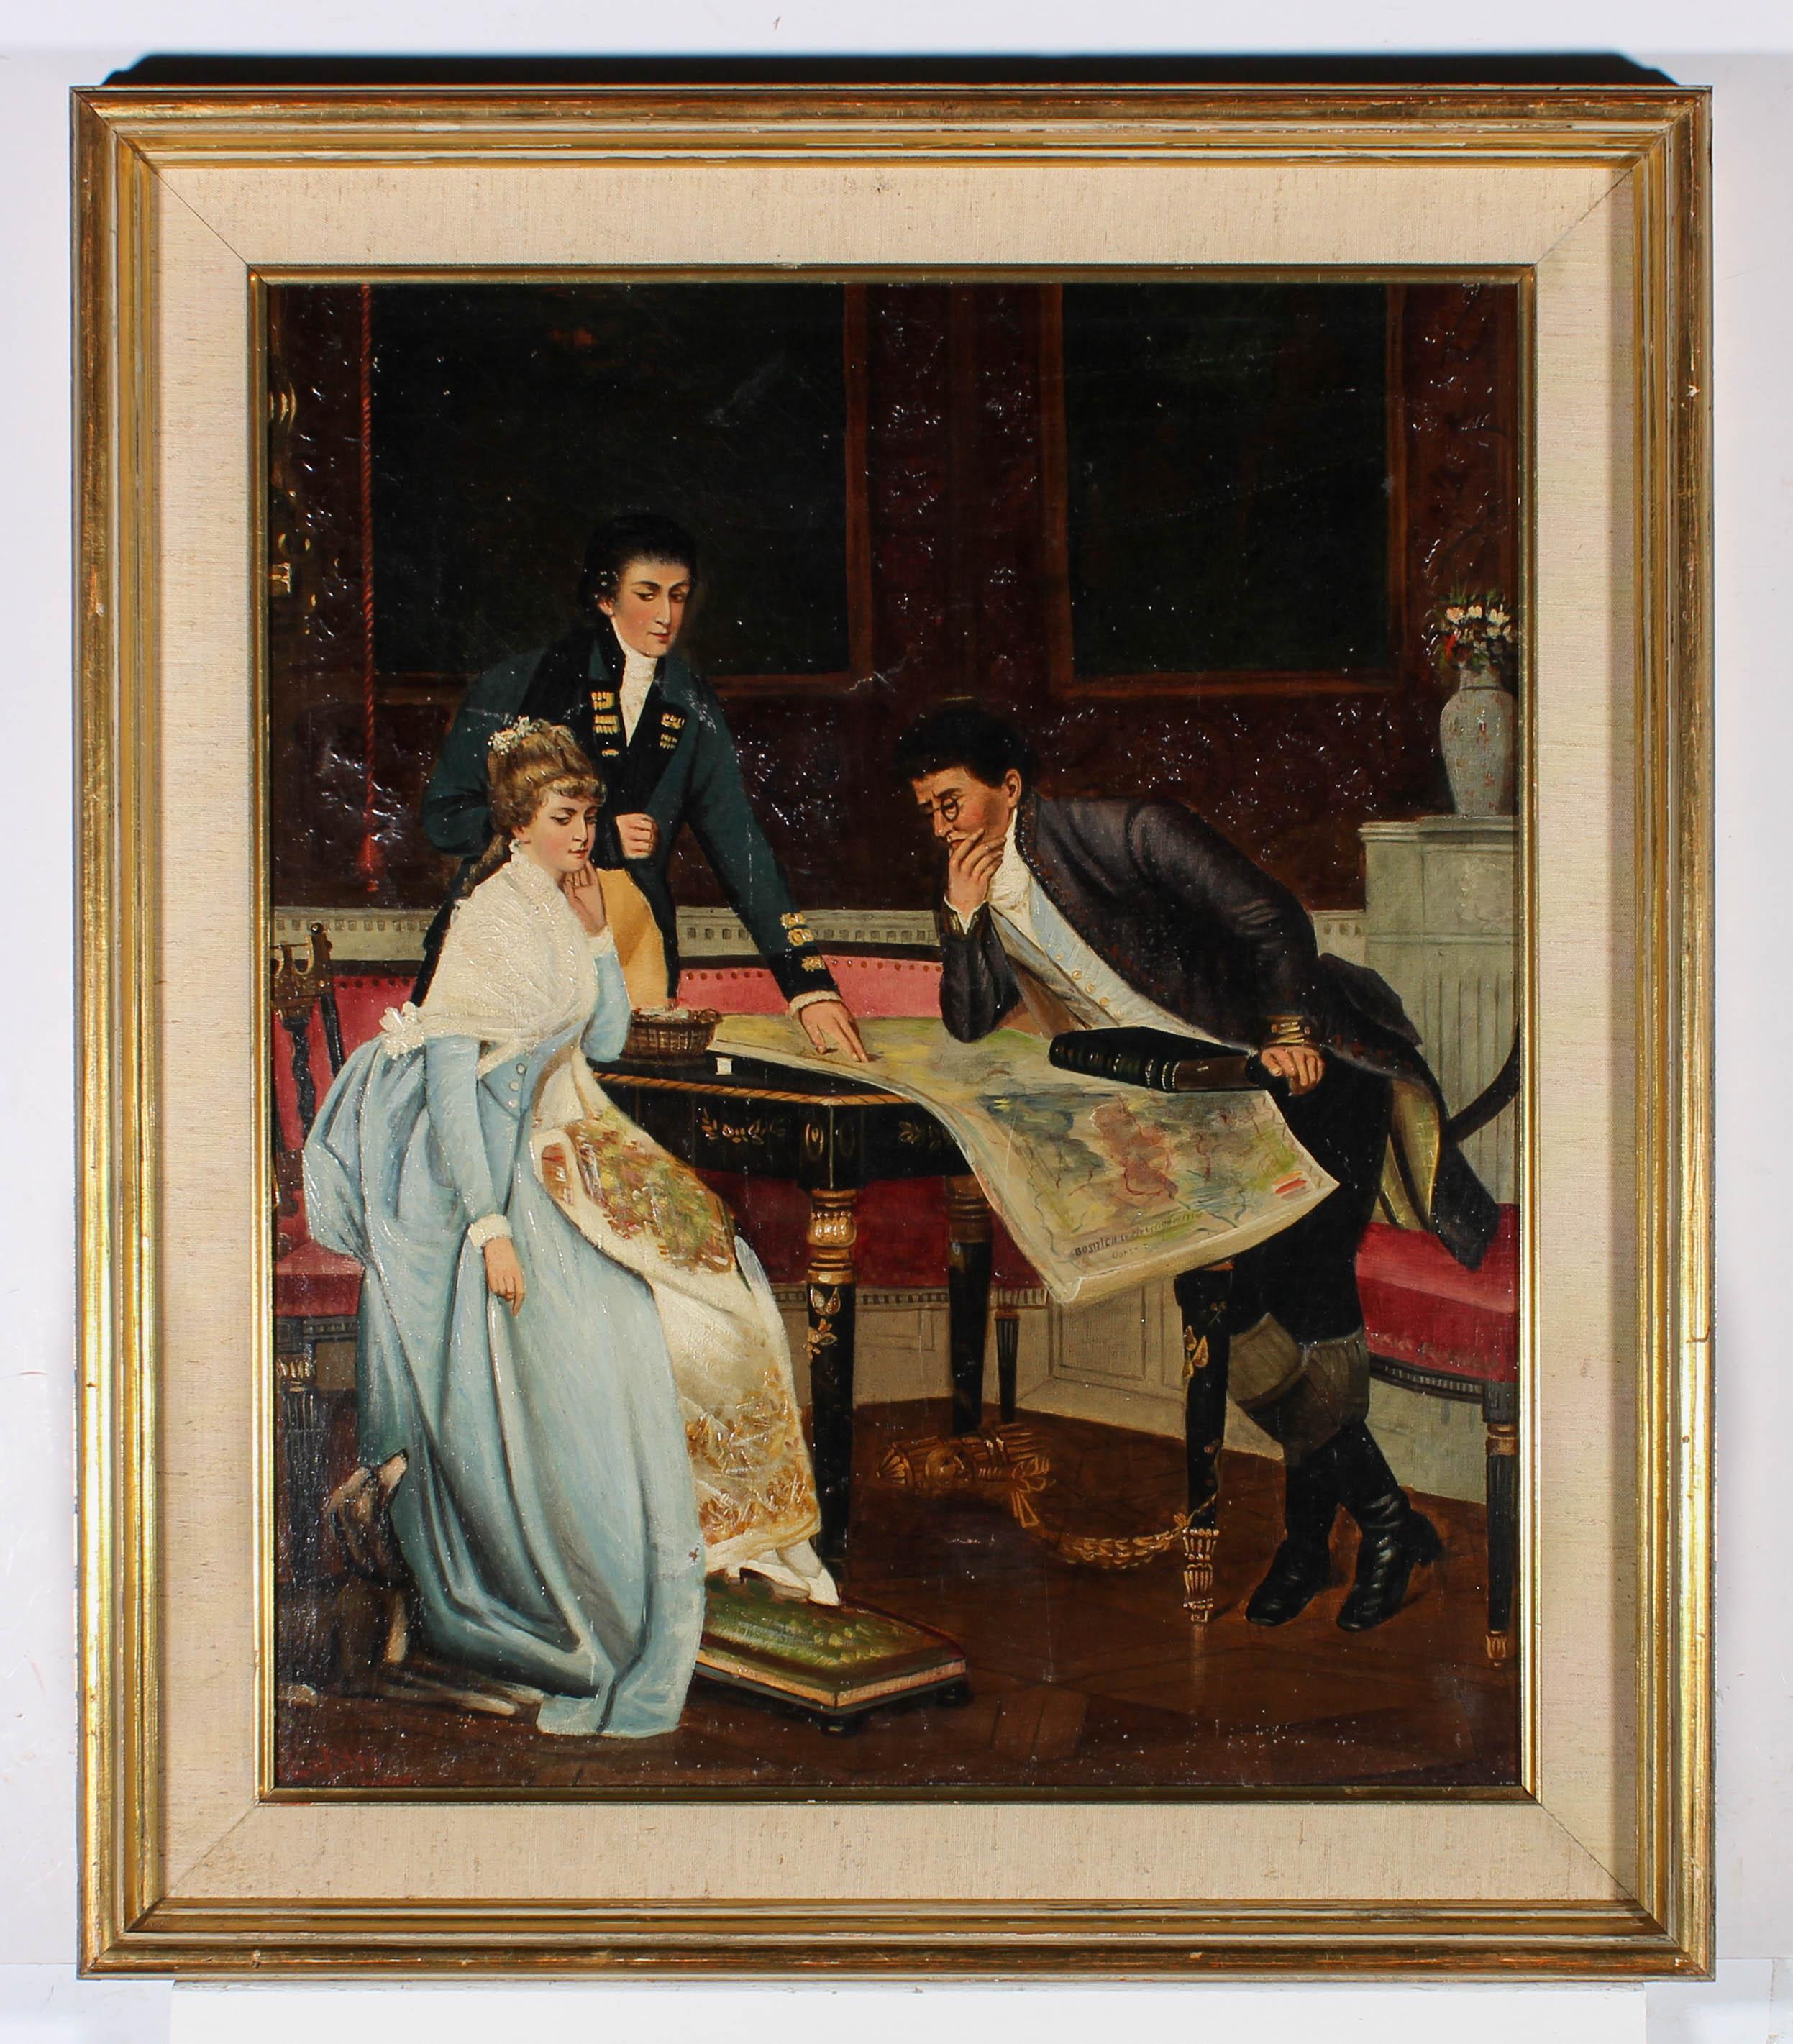 A fine French School genre scene showing a Regency interior, with two men and a woman leaning over a map on a table. The artist has signed to the lower left corner and the painting has been presented in a 20th Century gilt frame with linen slip. On